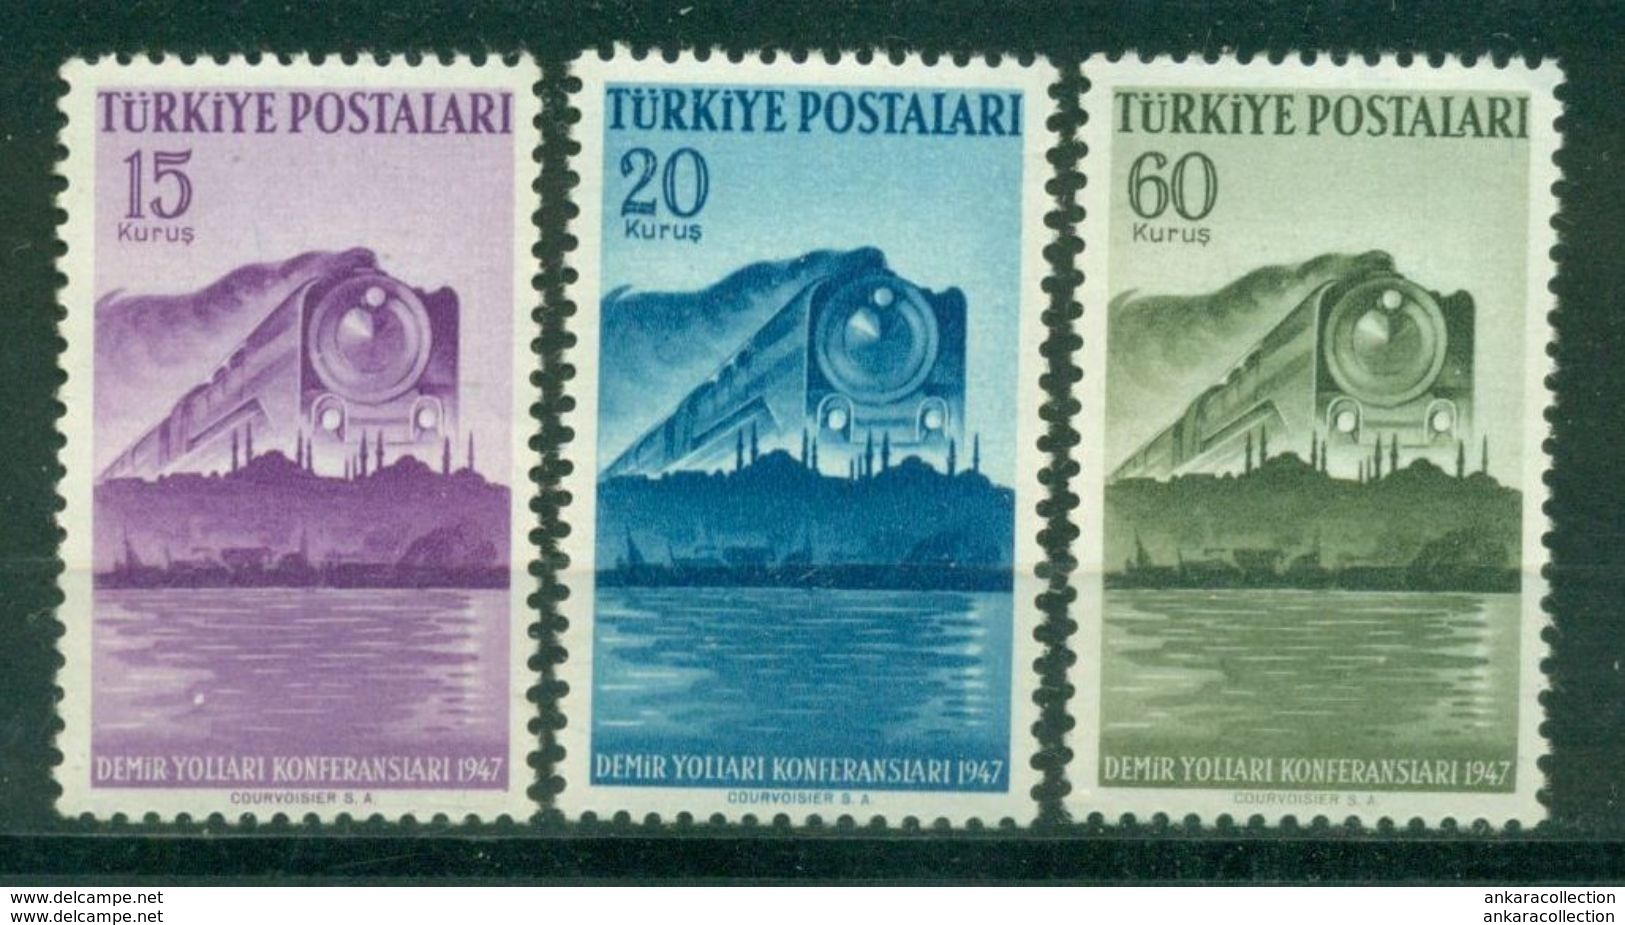 AC - TURKEY STAMP - THE INTERNATIONAL RAILROAD CONFERENCES MNH 09 OCTOBER 1947 - Unused Stamps